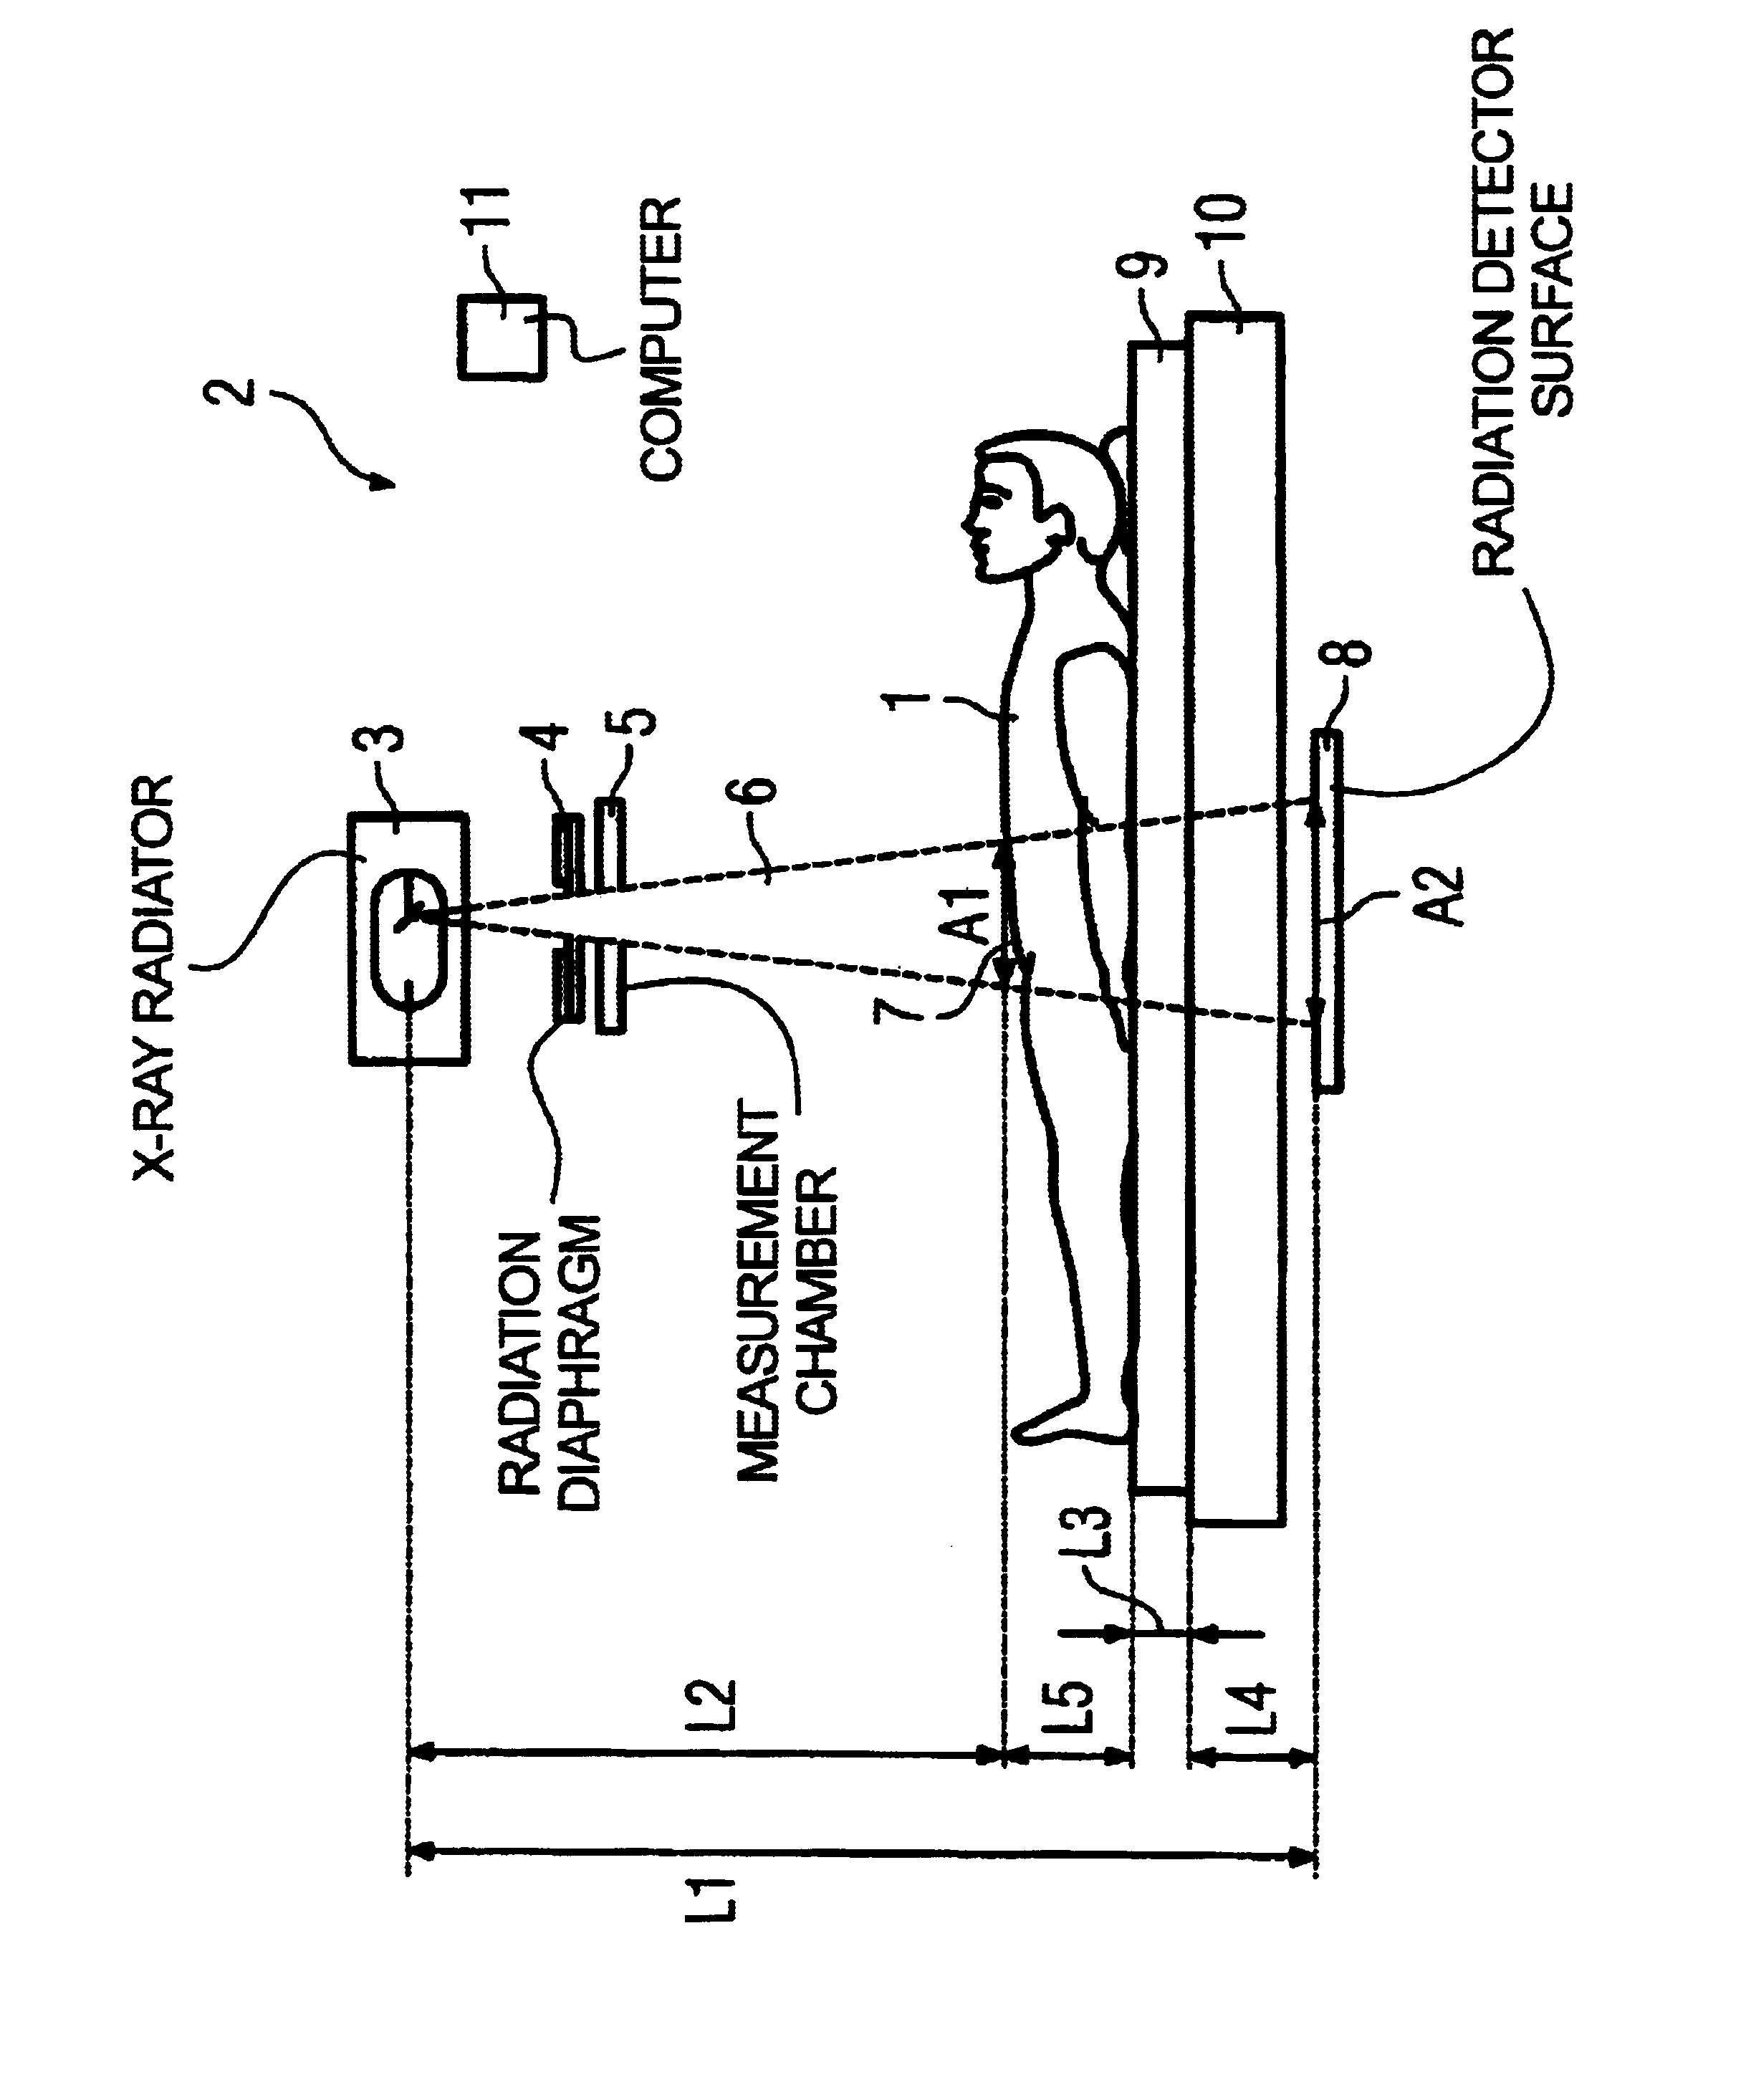 X-ray system and method to determine the effective skin input dose in x-ray examinations